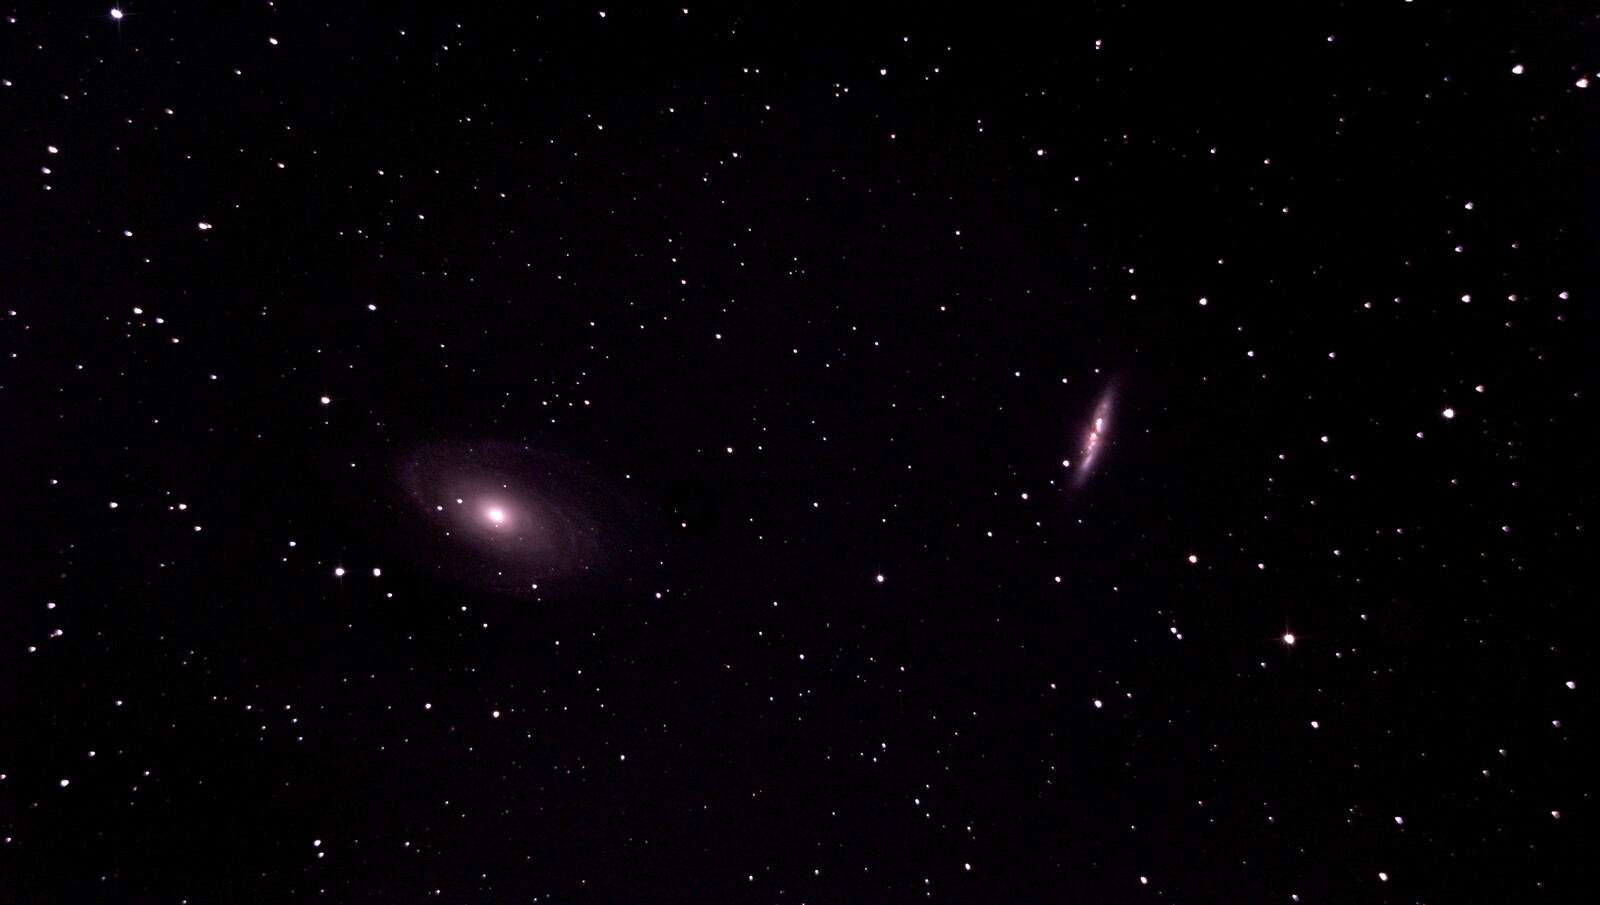 bodes & cigar galaxies - Astro Images - Photo Gallery - Cloudy Nights